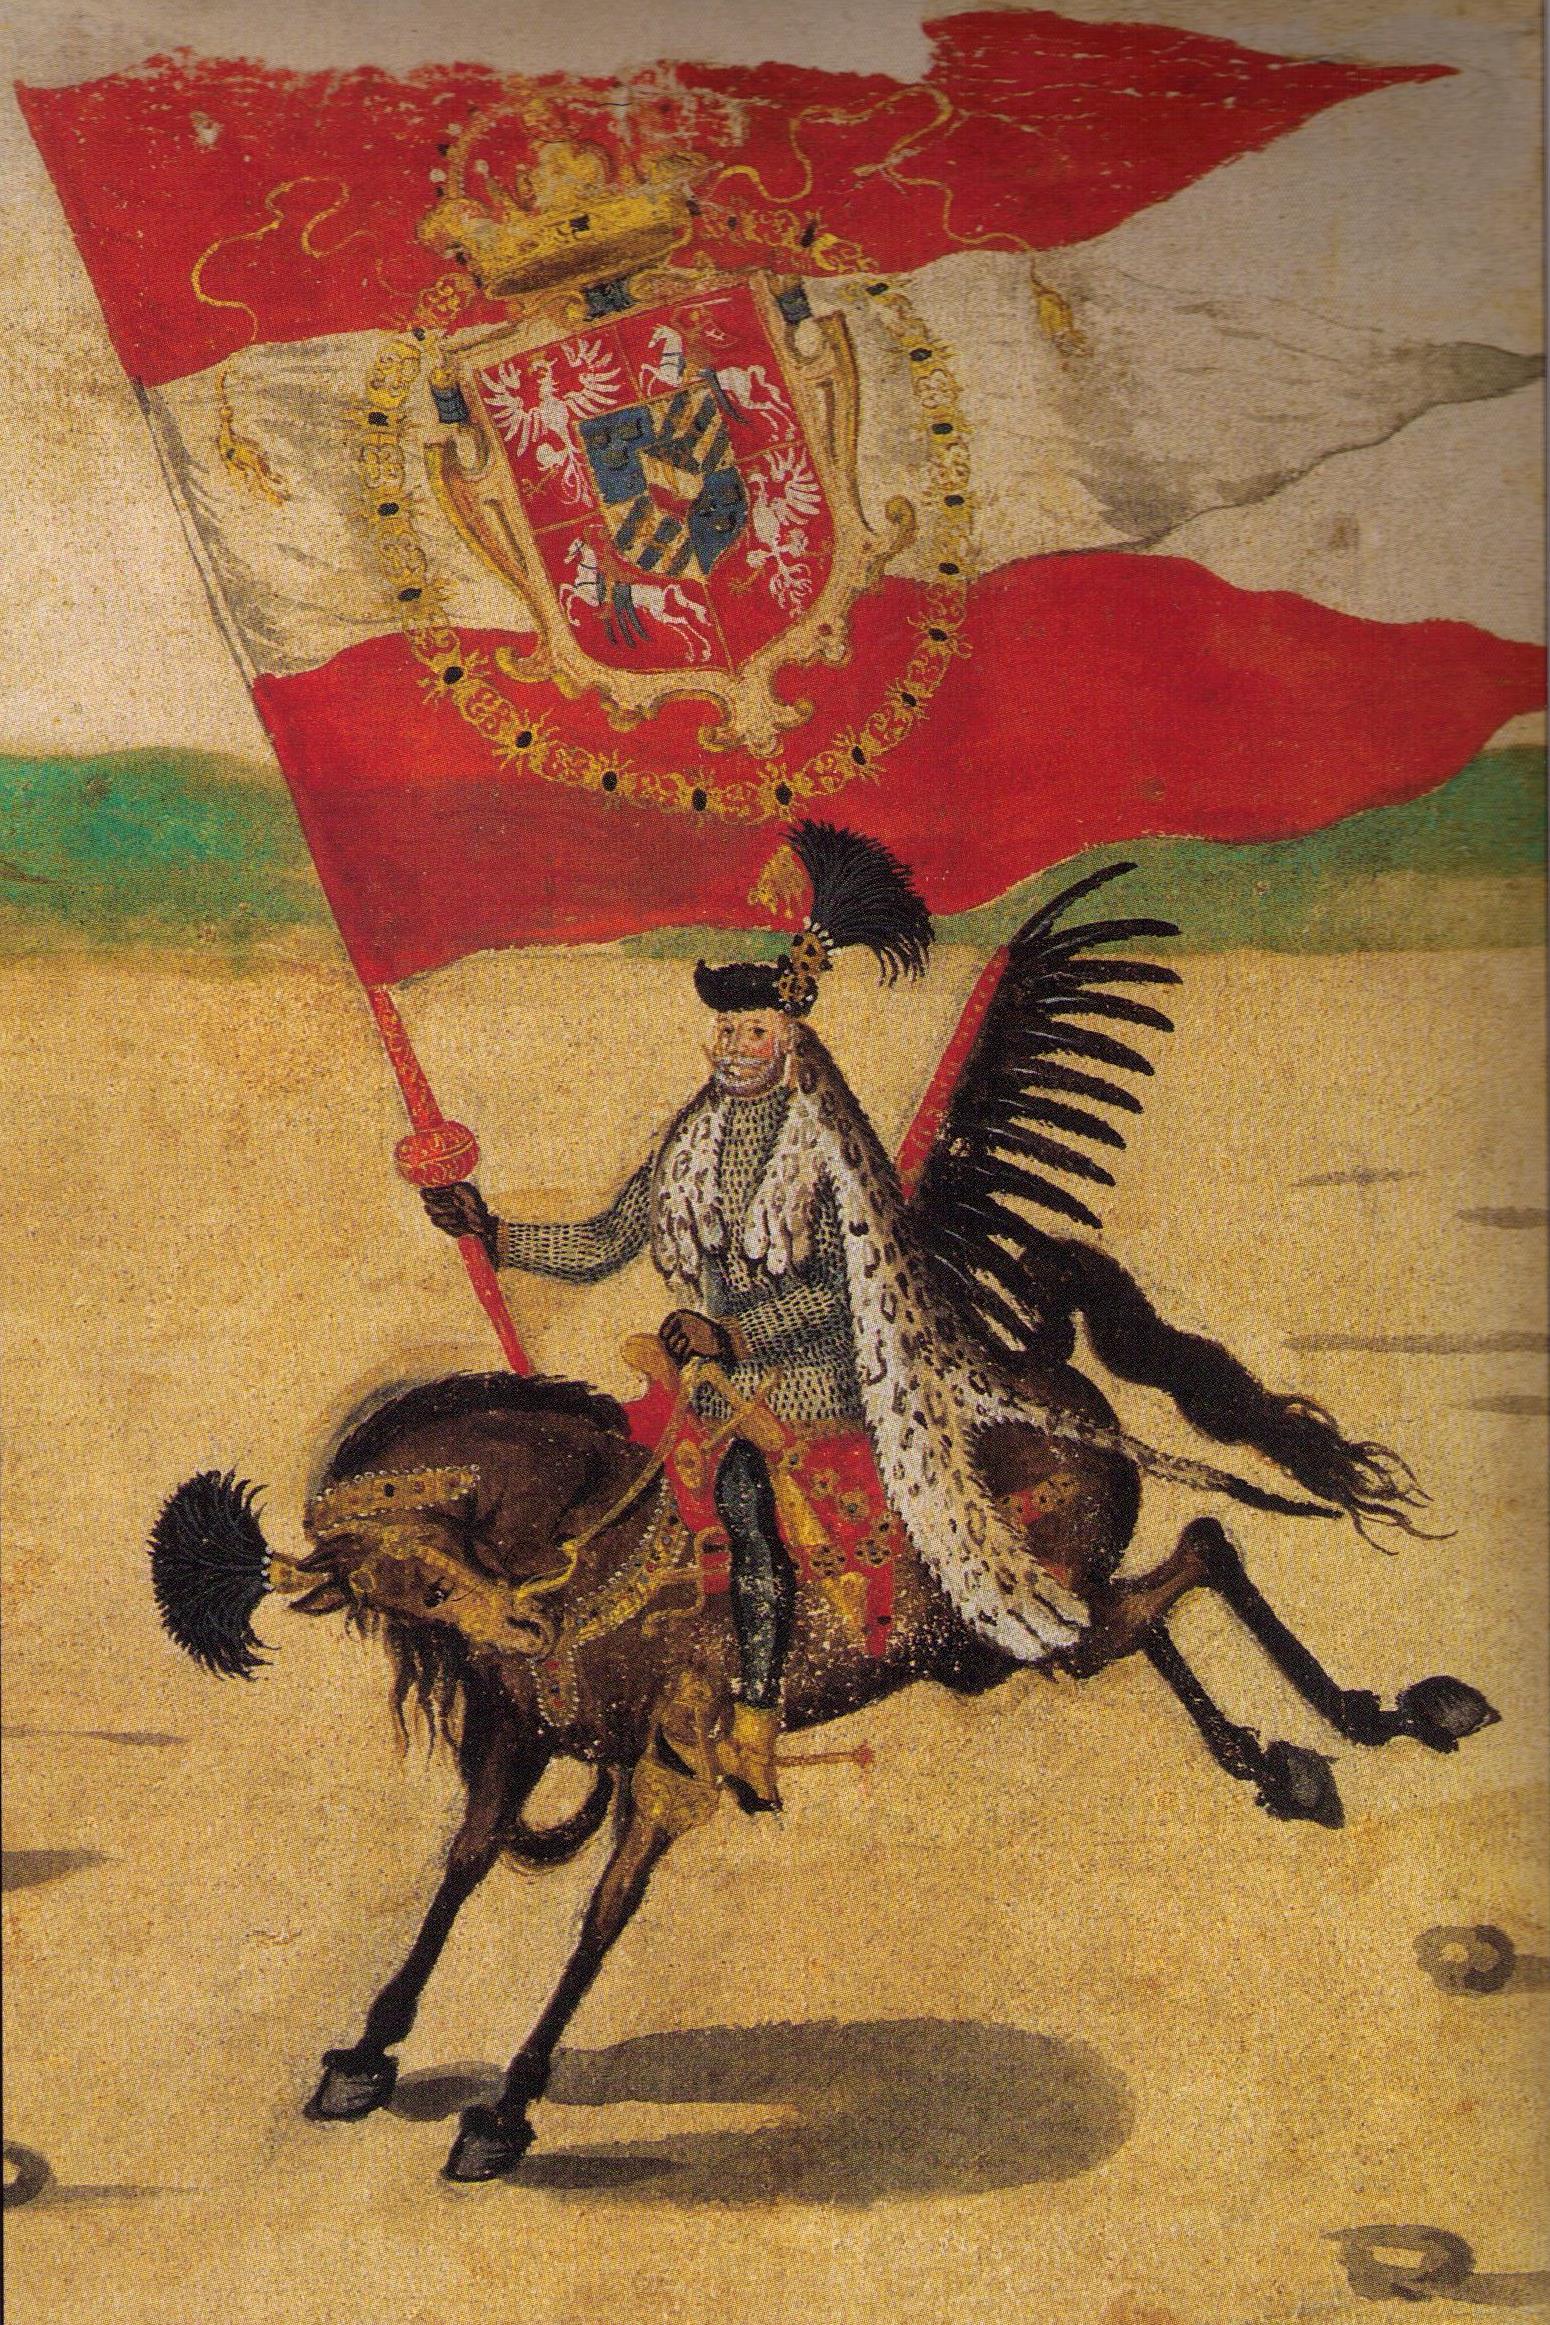 Grand Standard Bearer of the Polish Crown (Chorąży Wielki Koronny), Sebastian Sobieski, at the wedding procession of King Sigismund III of Poland and Sweden, as painted anonymously on the Stockholm Roll (c. 1605).